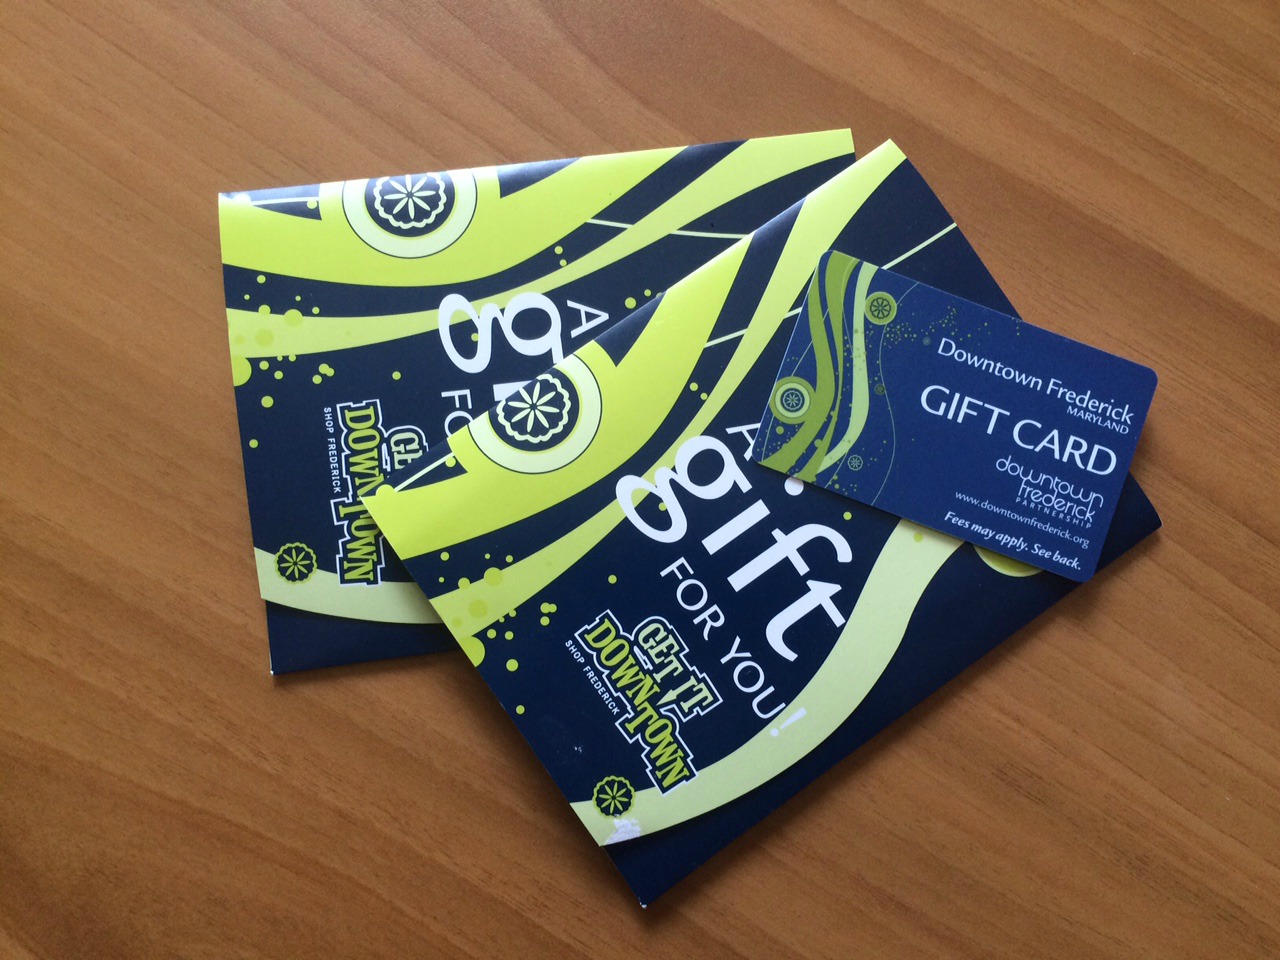 We're giving away a Downtown Frederick Gift Card on May 28, 2015!